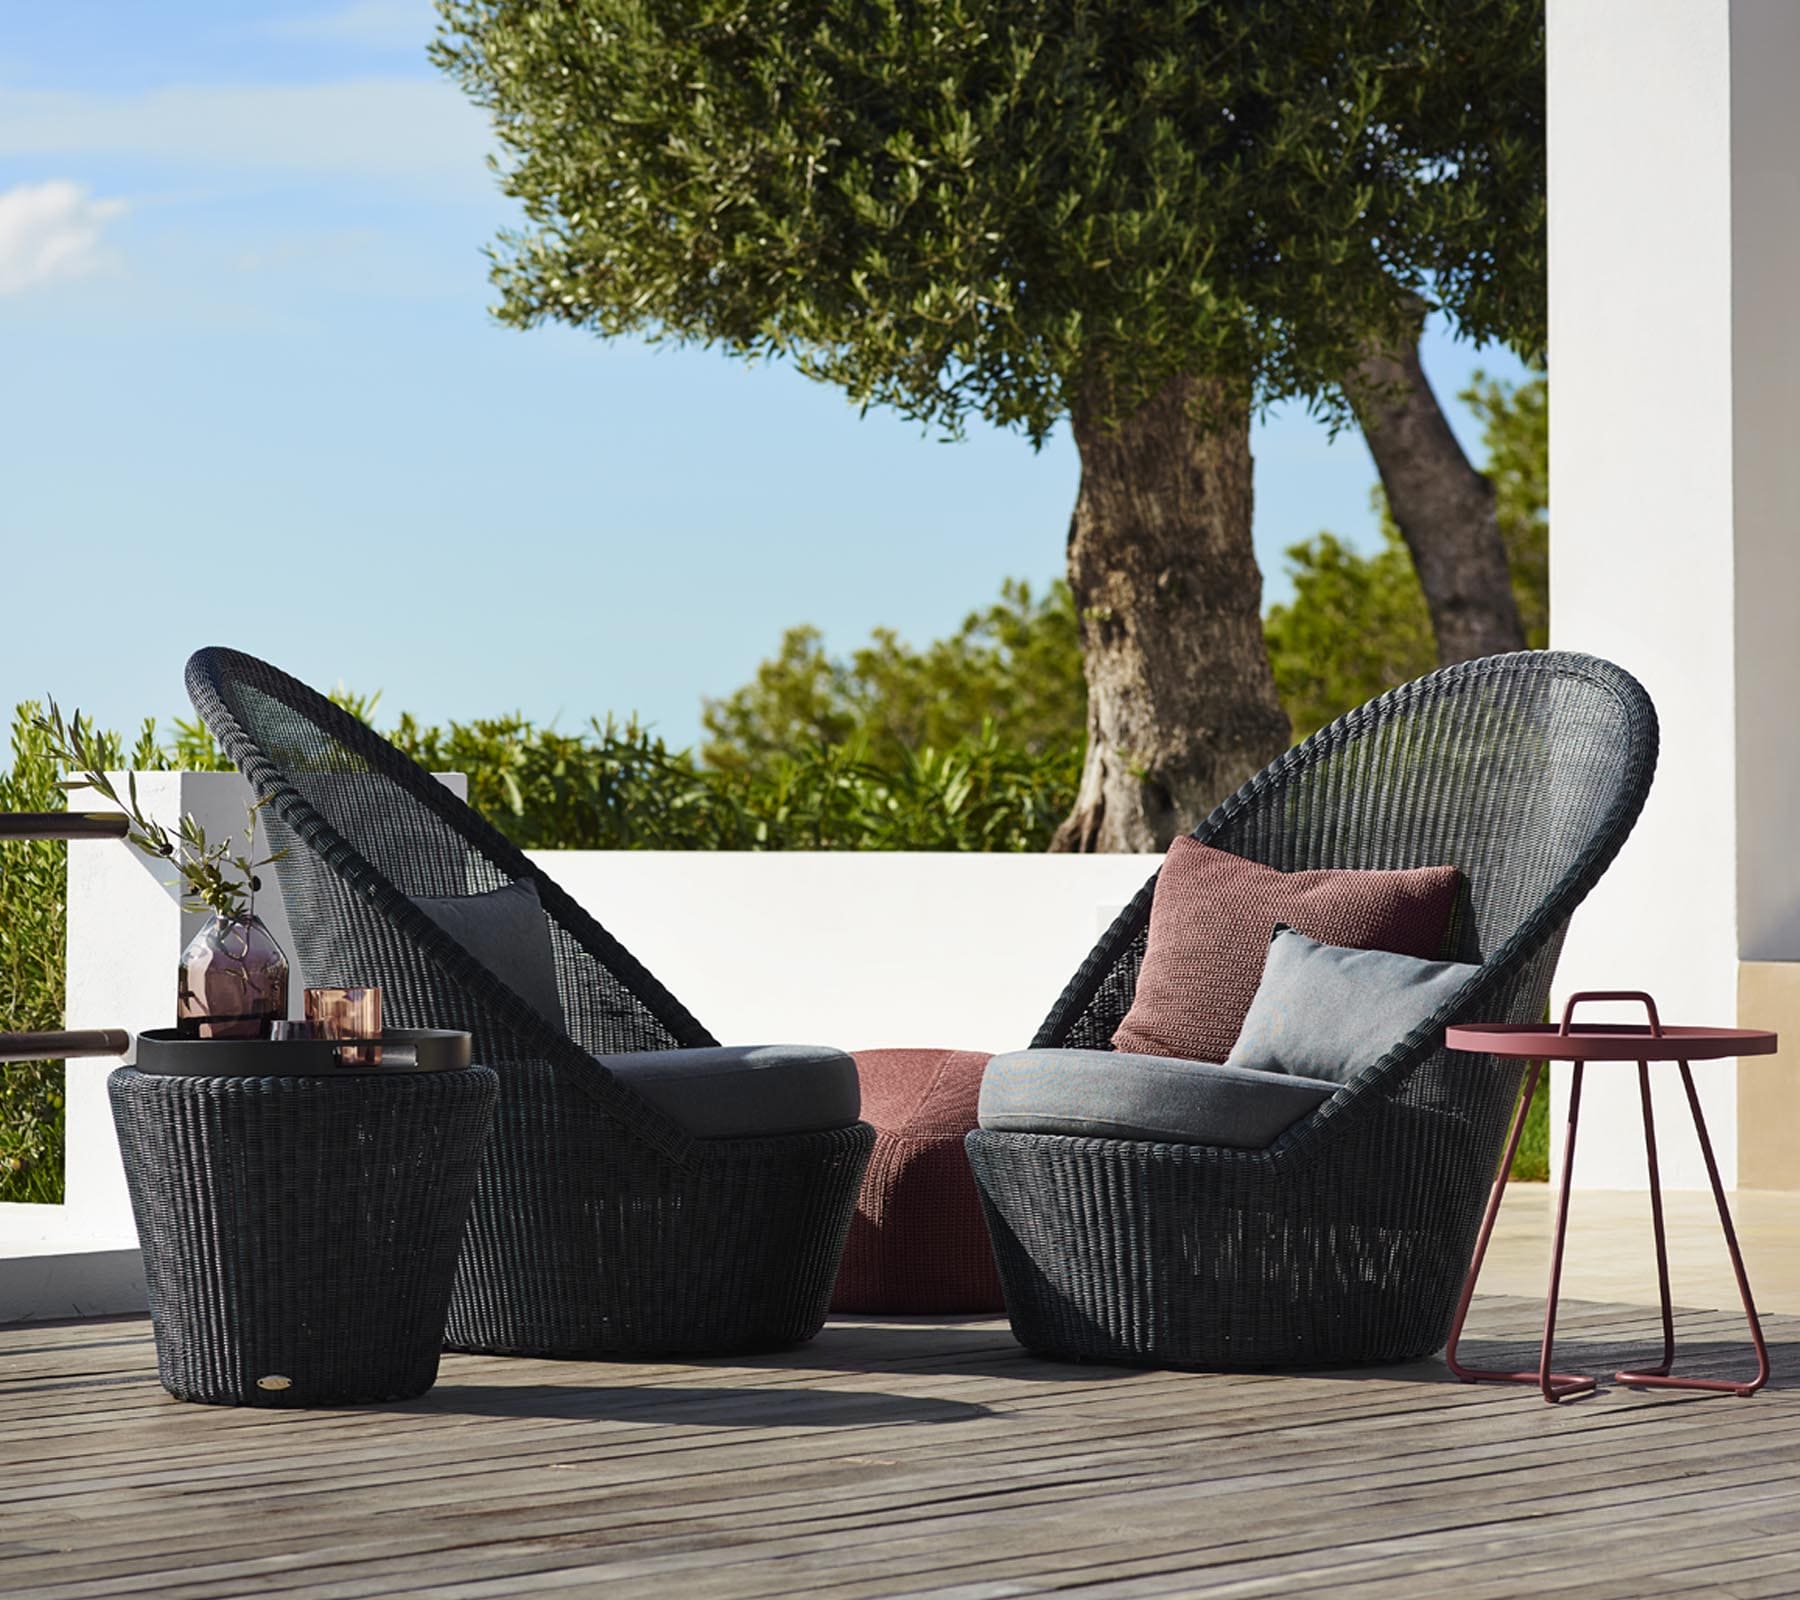 Boxhill's Kingston Sunchair Lounge with Wheels lifestyle image at patio with Kingston Outdoor Footstool | Side Table and a small red round table at the side